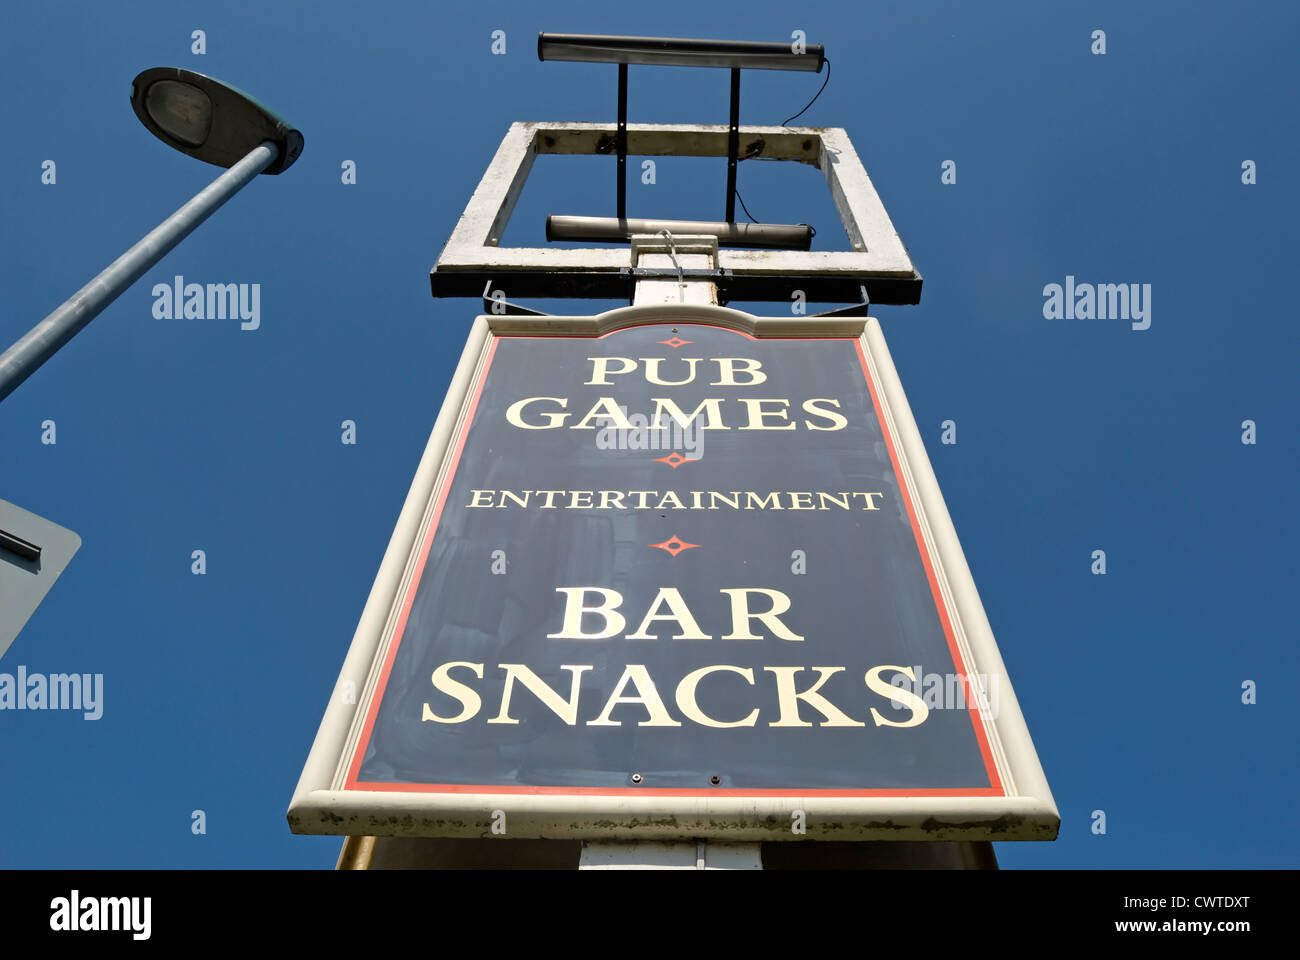 empty pub sign frame outside a closed pub with board below advertising pub games and bar snacks, hounslow, middlesex, england Stock Photo